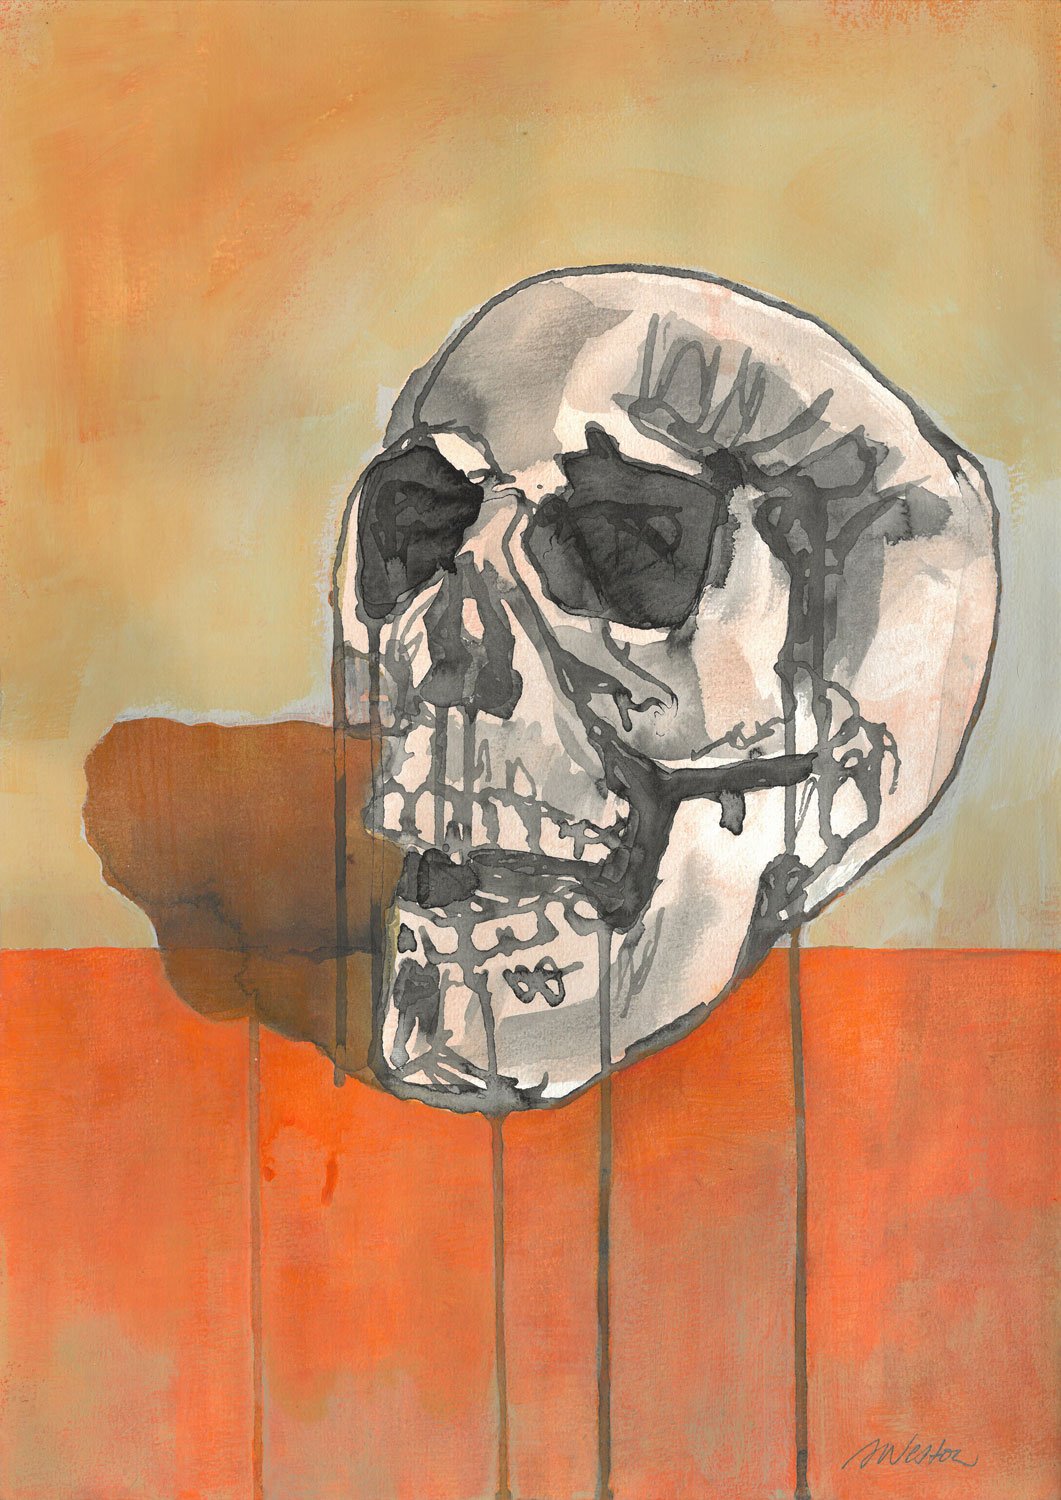   Orange Skull , Ink and mixed media on watercolour paper, 42 x 29.7 cm 